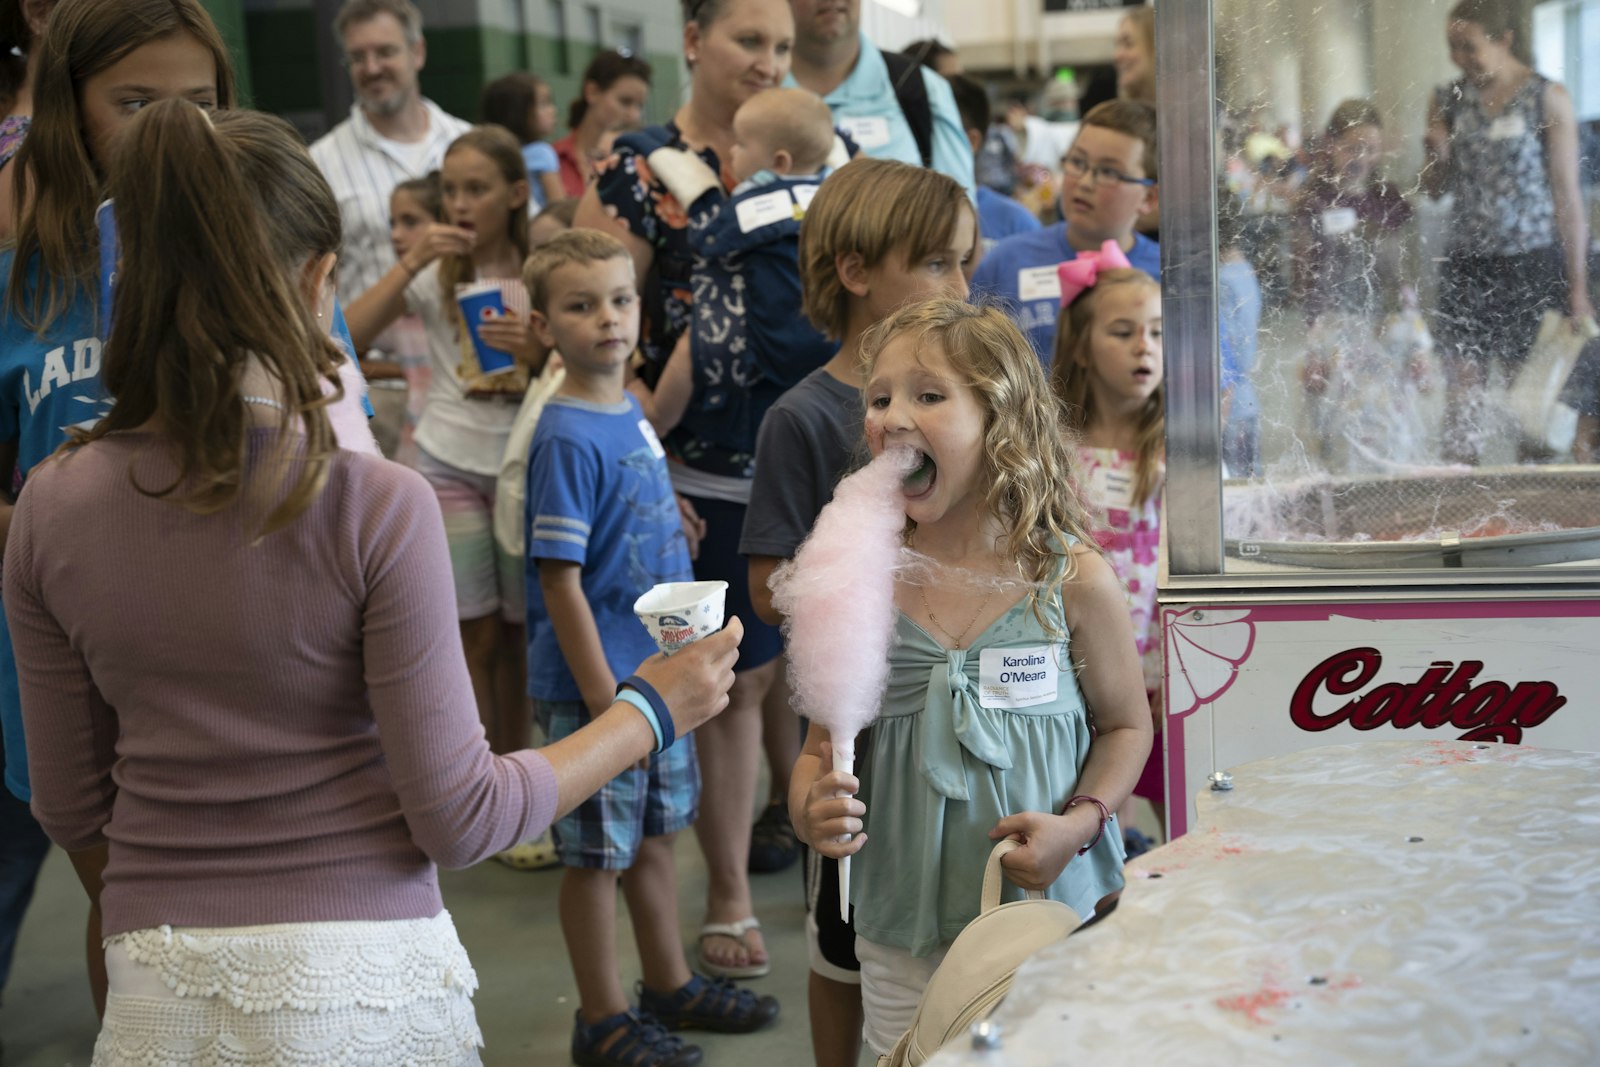 A young girl enjoys cotton candy, one of many attractions for children and families at the 25th anniversary celebration.  One sister called the event a "family meeting."